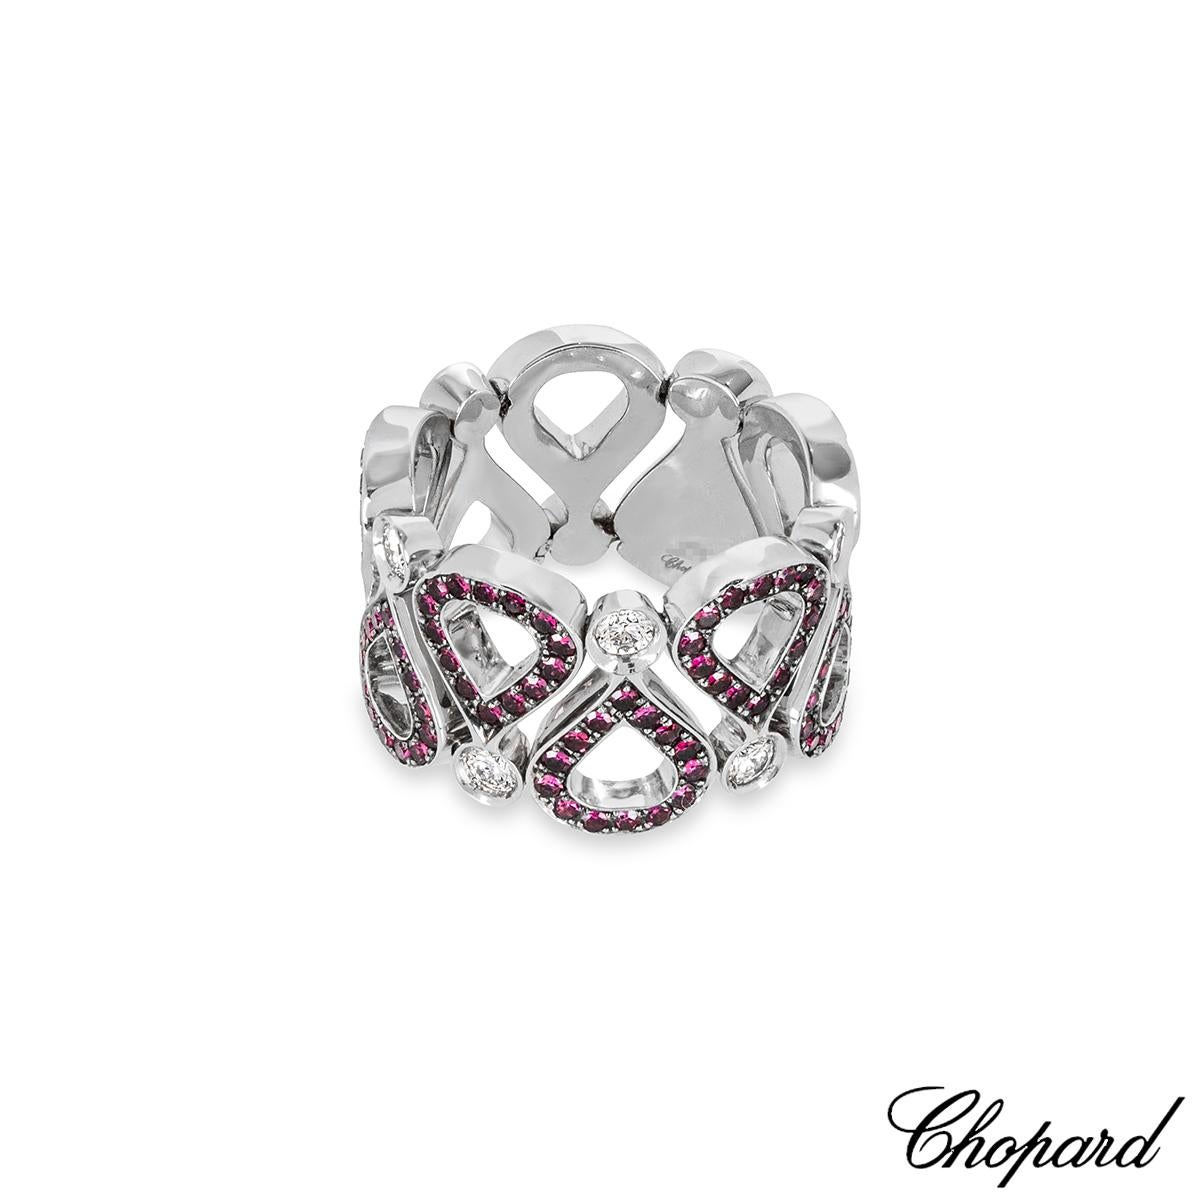 Chopard White Gold Ruby & Diamond Pushkin Ring 82/3935-0 In New Condition For Sale In London, GB